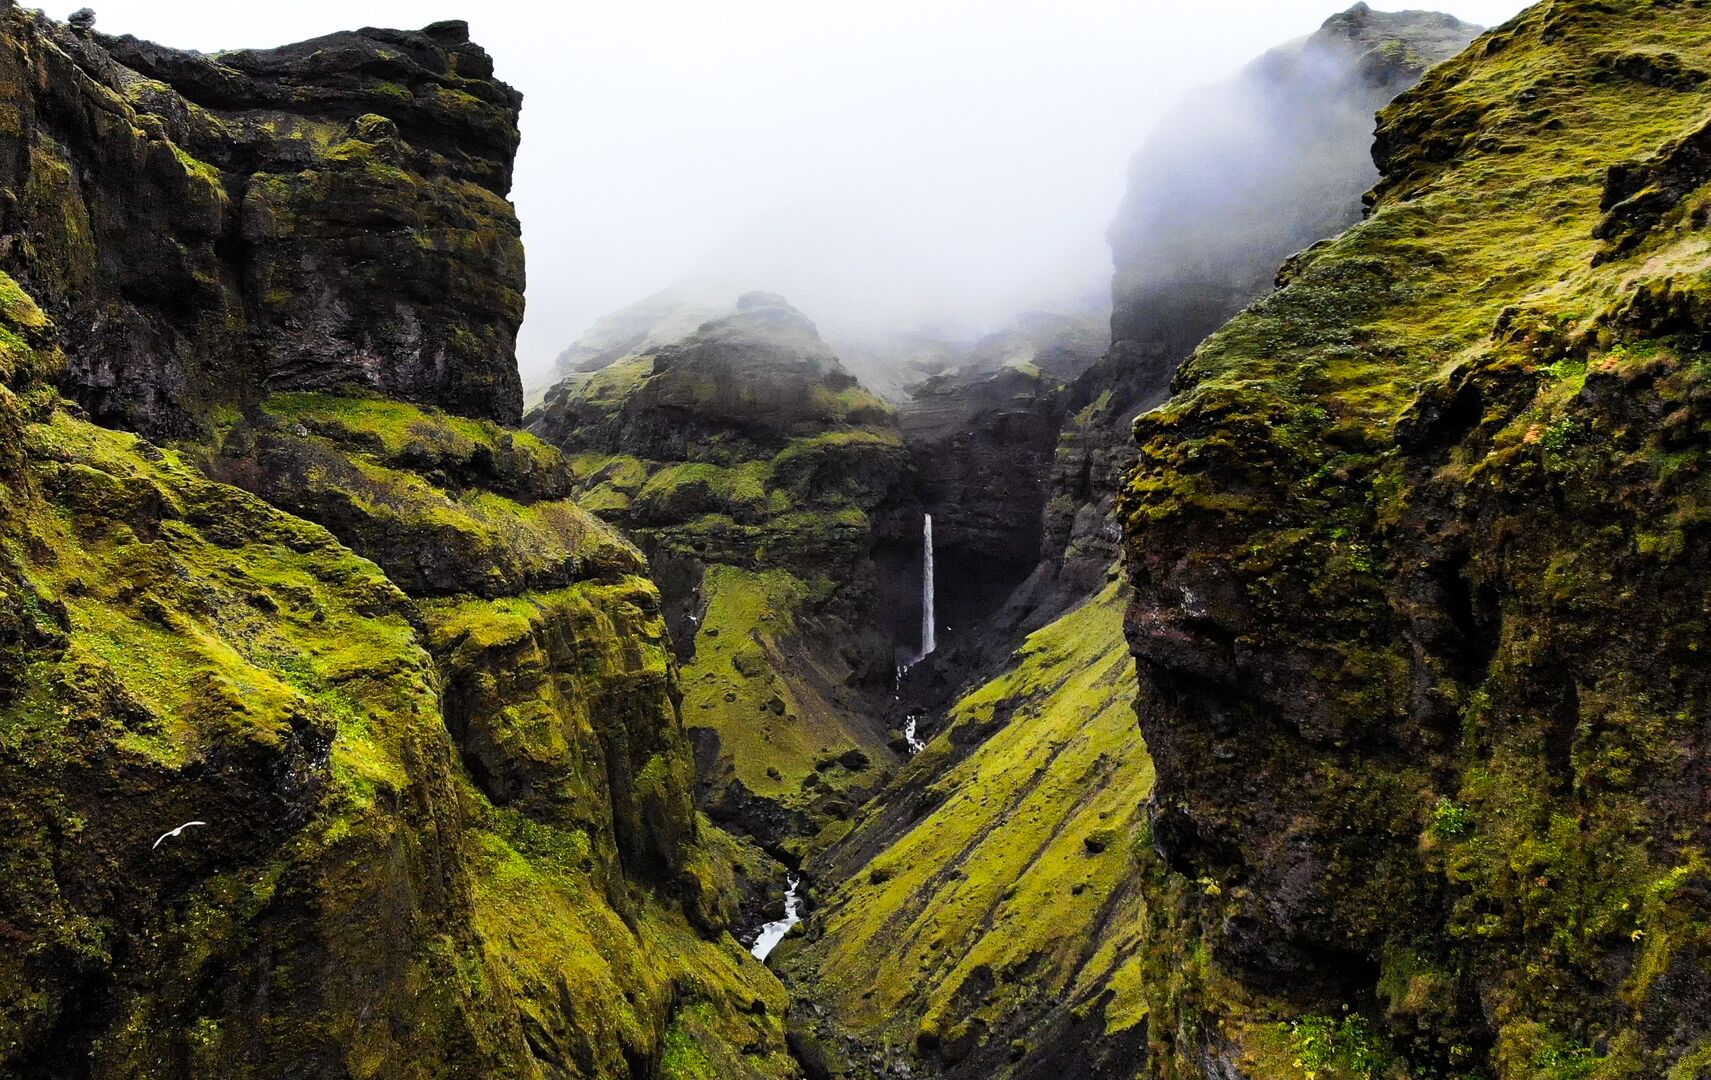 Views of mountains in the clouds in Vatnajökull National Park. The picture shows Mulagljufur valley, a lush green, mountainous landscape with a small waterfall in the centre of the picture.